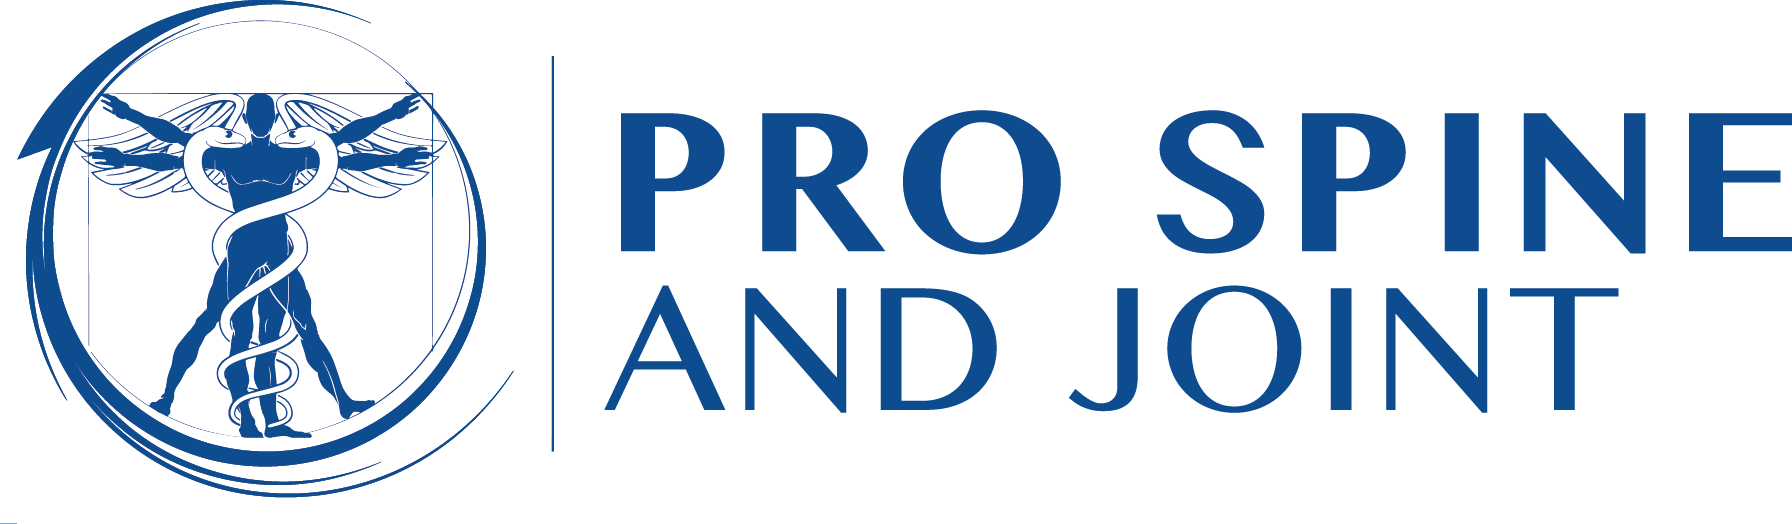 Pro Spine & Joint | (832) 674.0055 | www.prospineandjoint.com